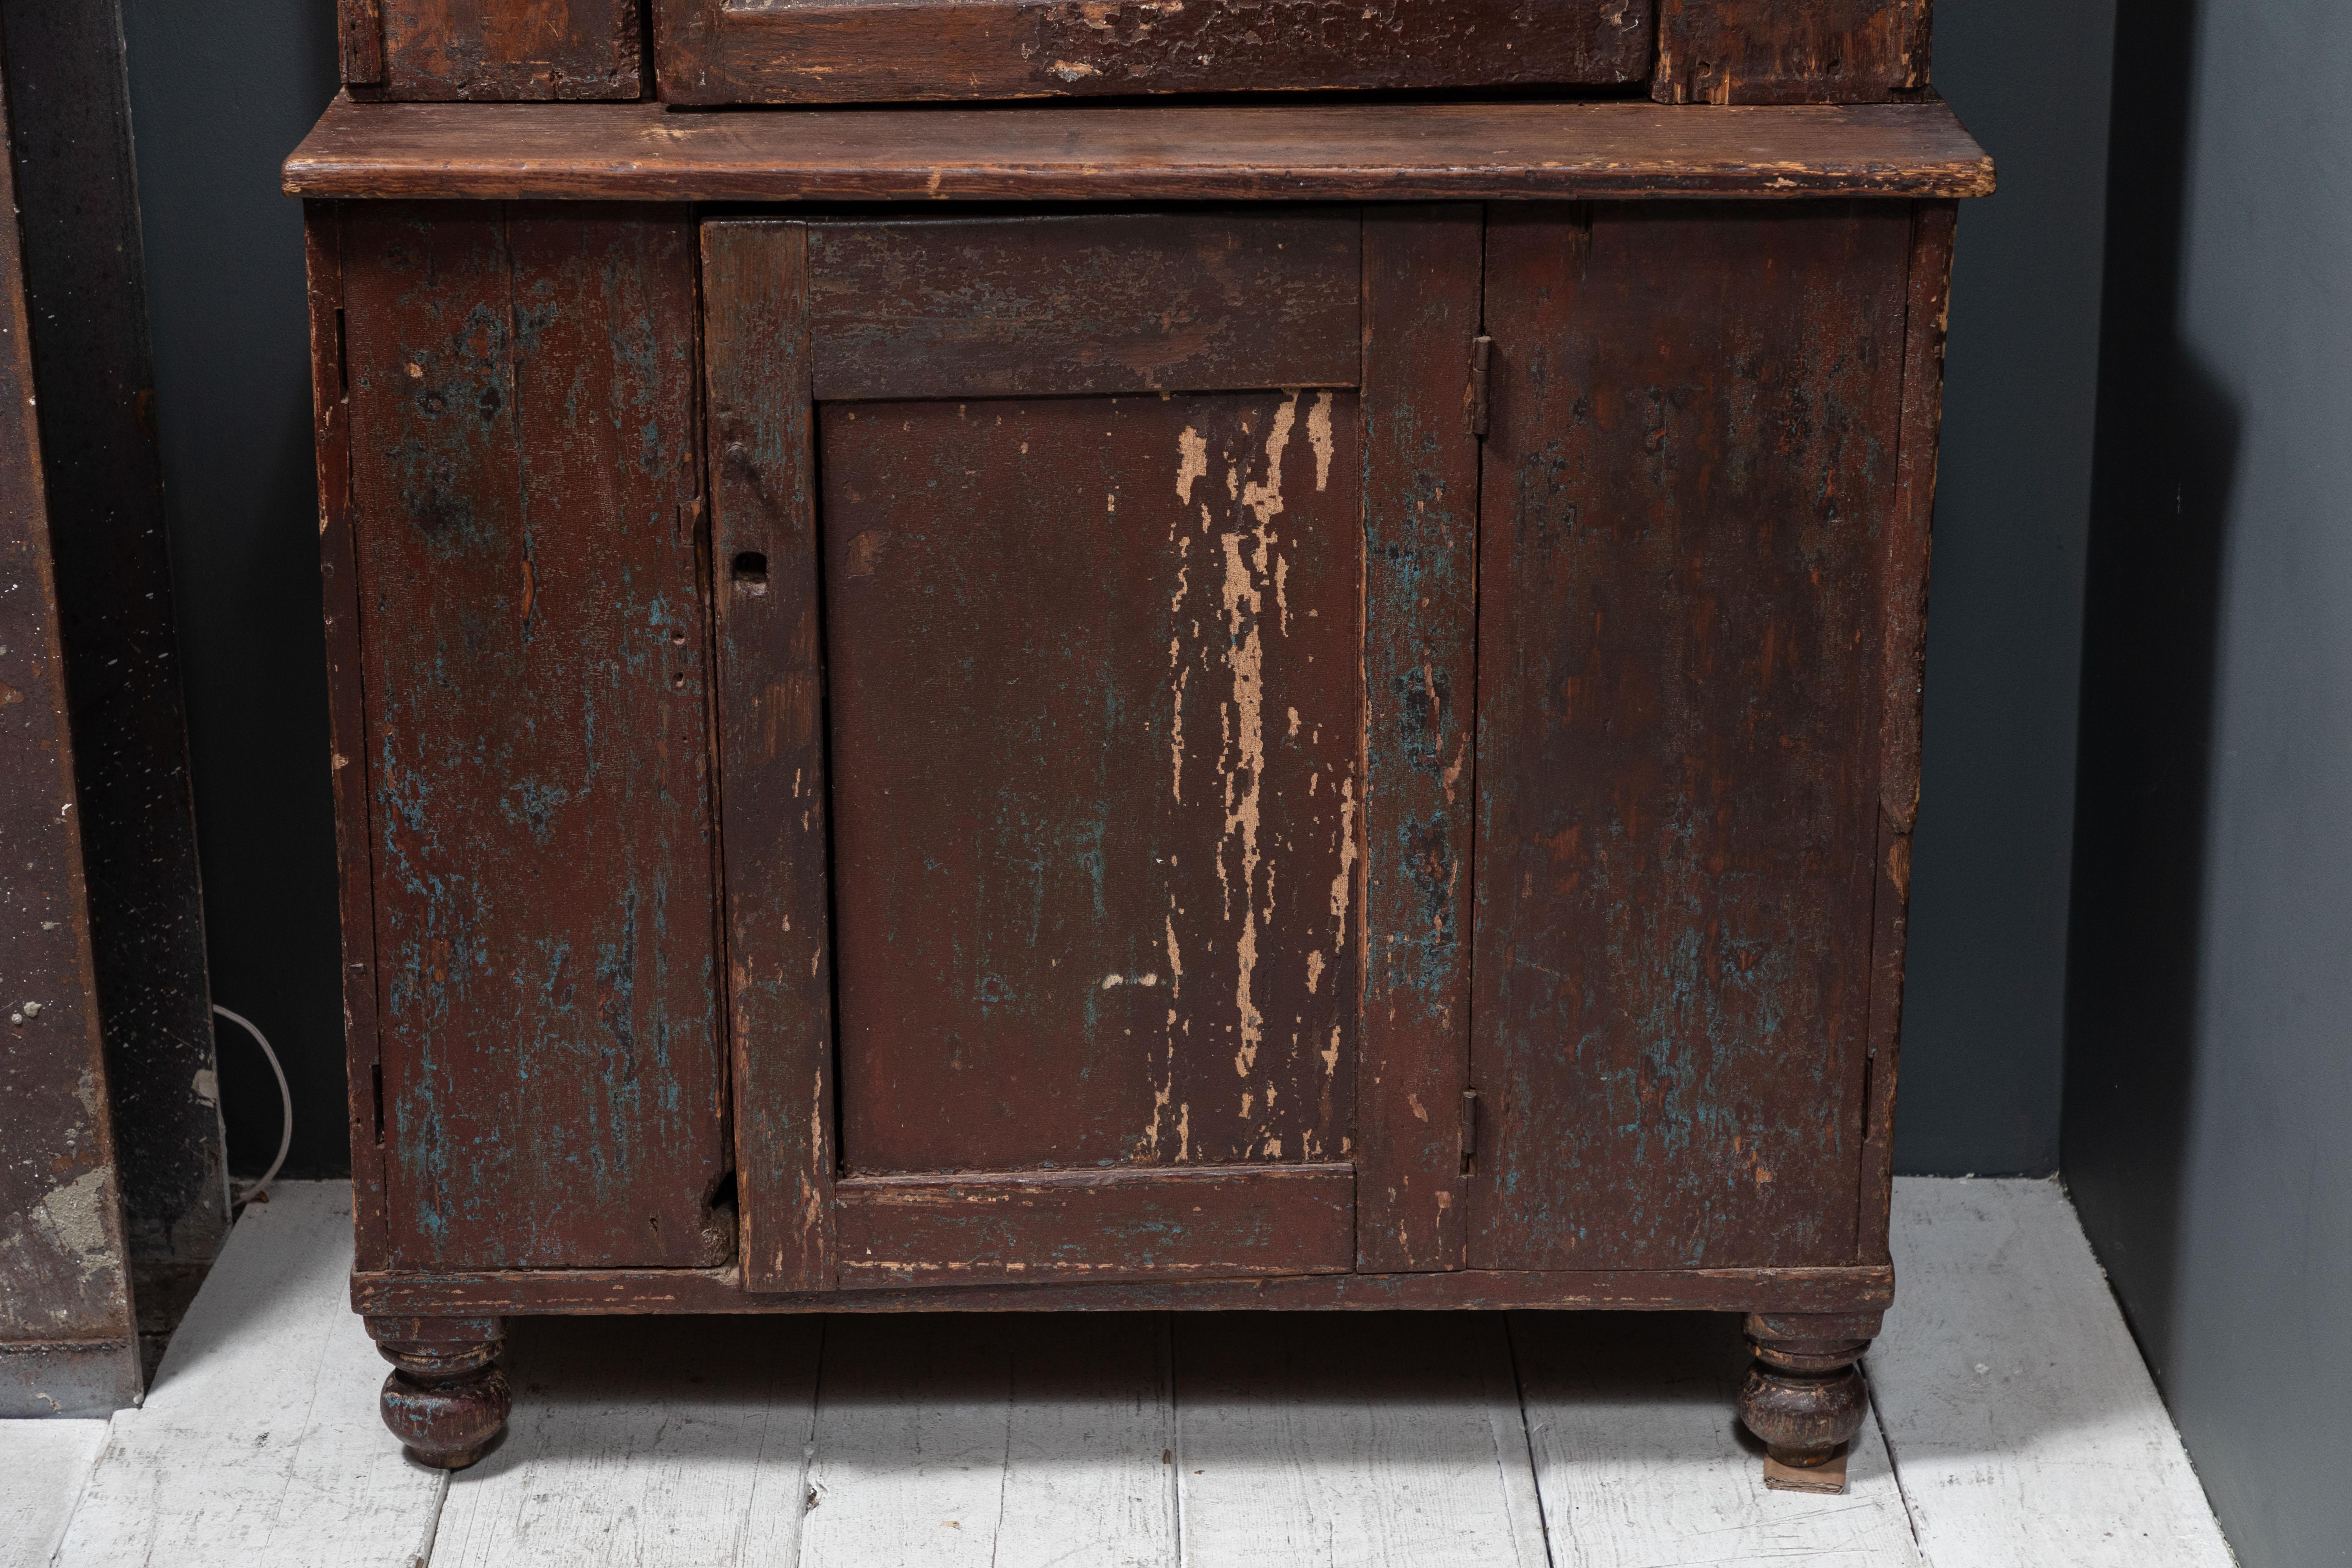 Rustic early American hutch. Upper four paned glass door with display shelves, lower door for closed storage. The hutch is finished with a crowned top and turned round feet.